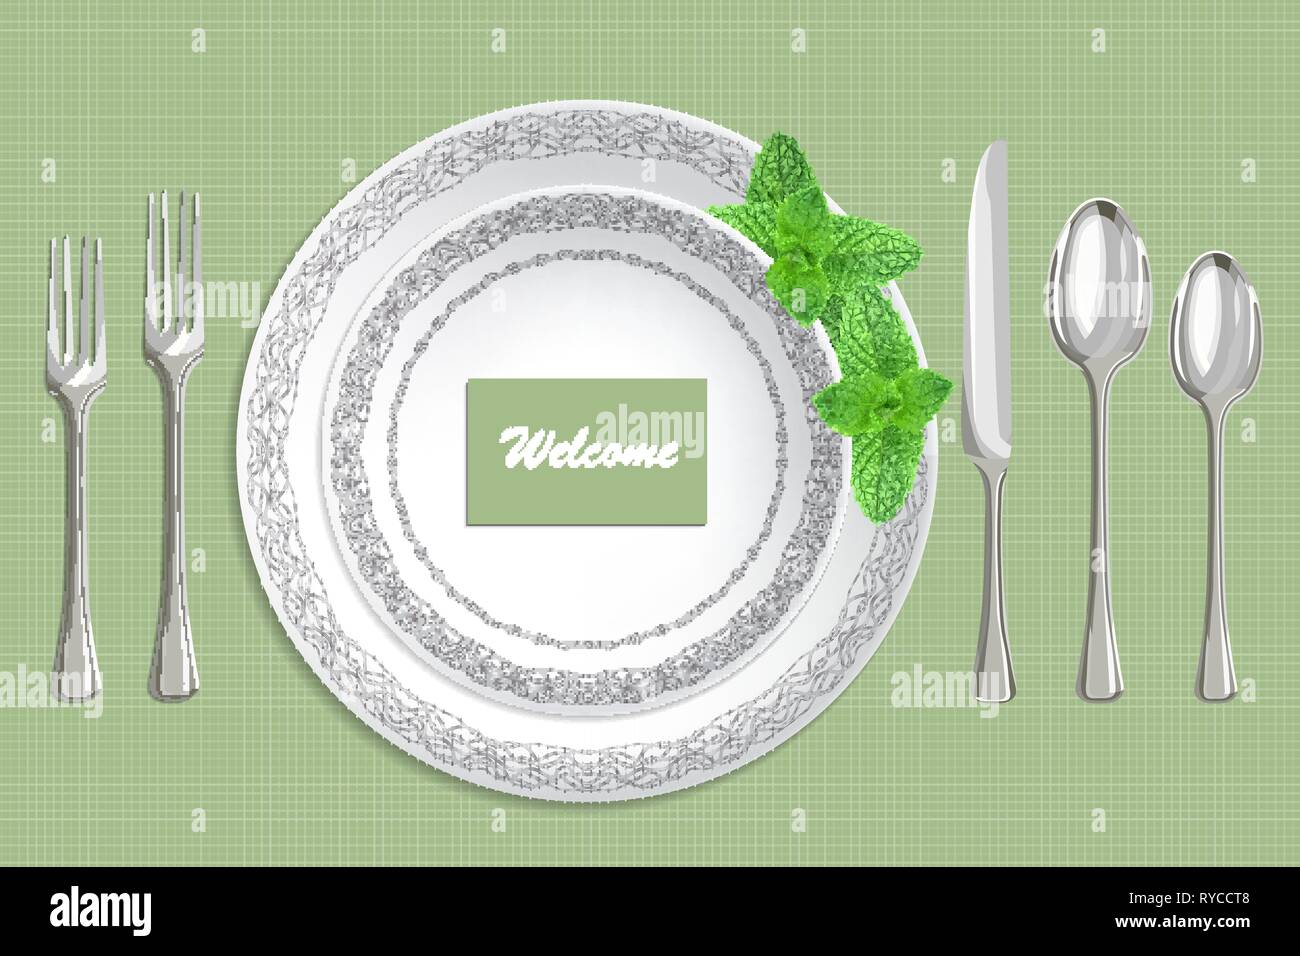 Table setting with plate, spoon, knife and fork on a green fabric background Stock Vector